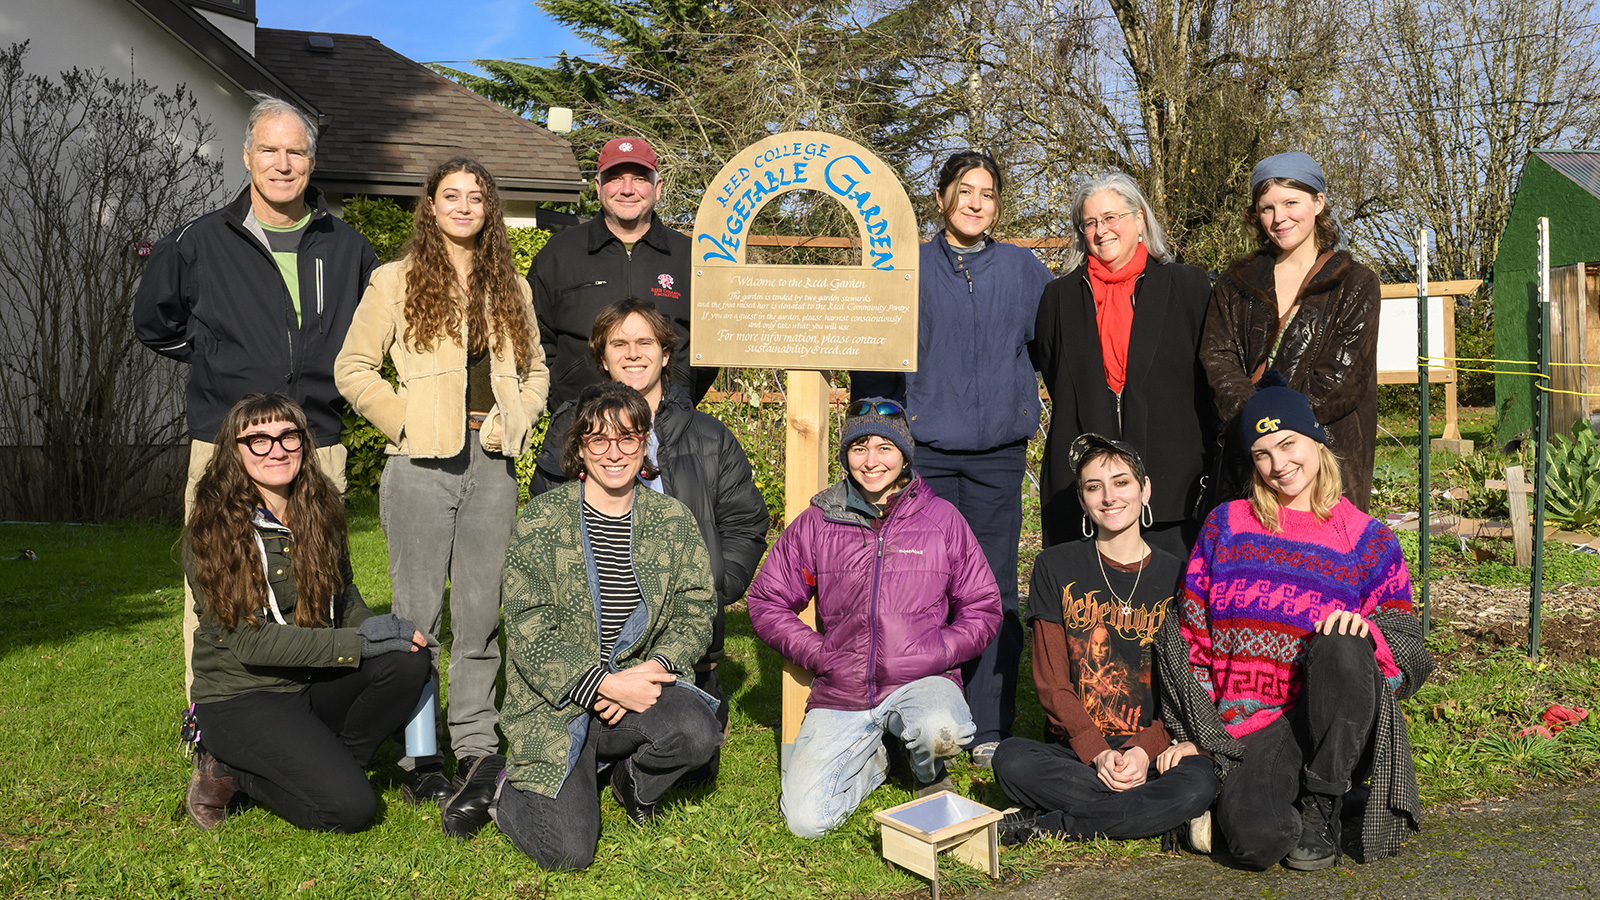 Group photo of class with the garden sign